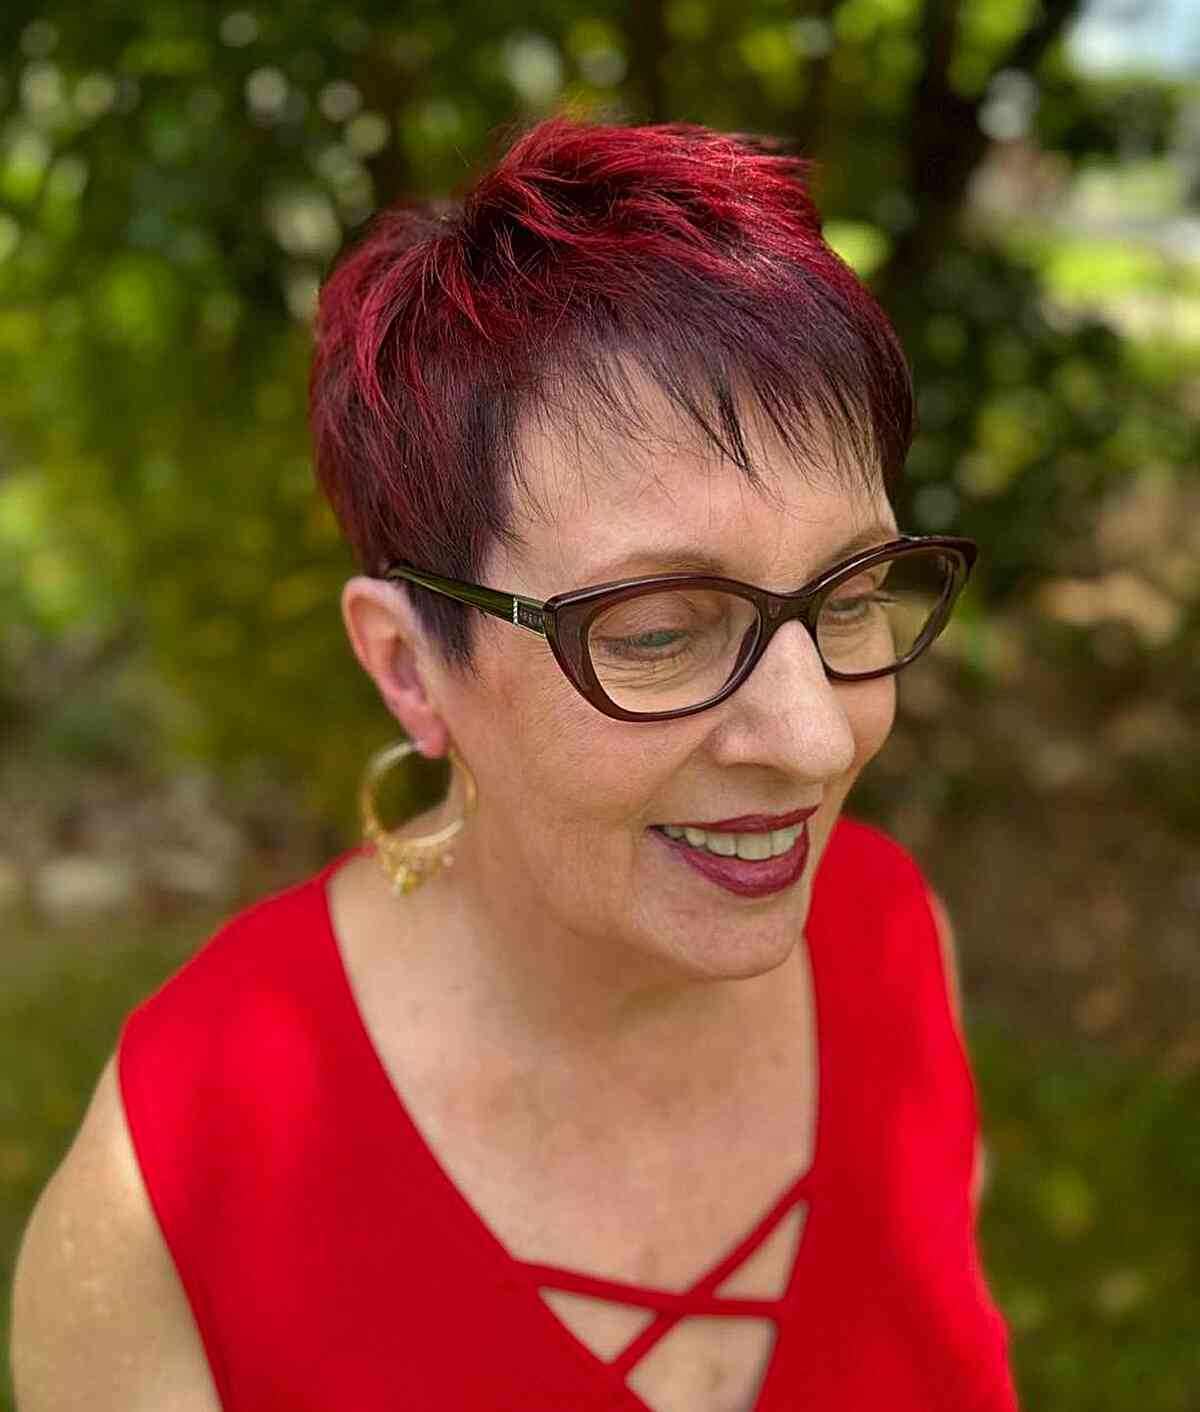 Red Razored Pixie Hair for Women Aged 50 and Up with Specs